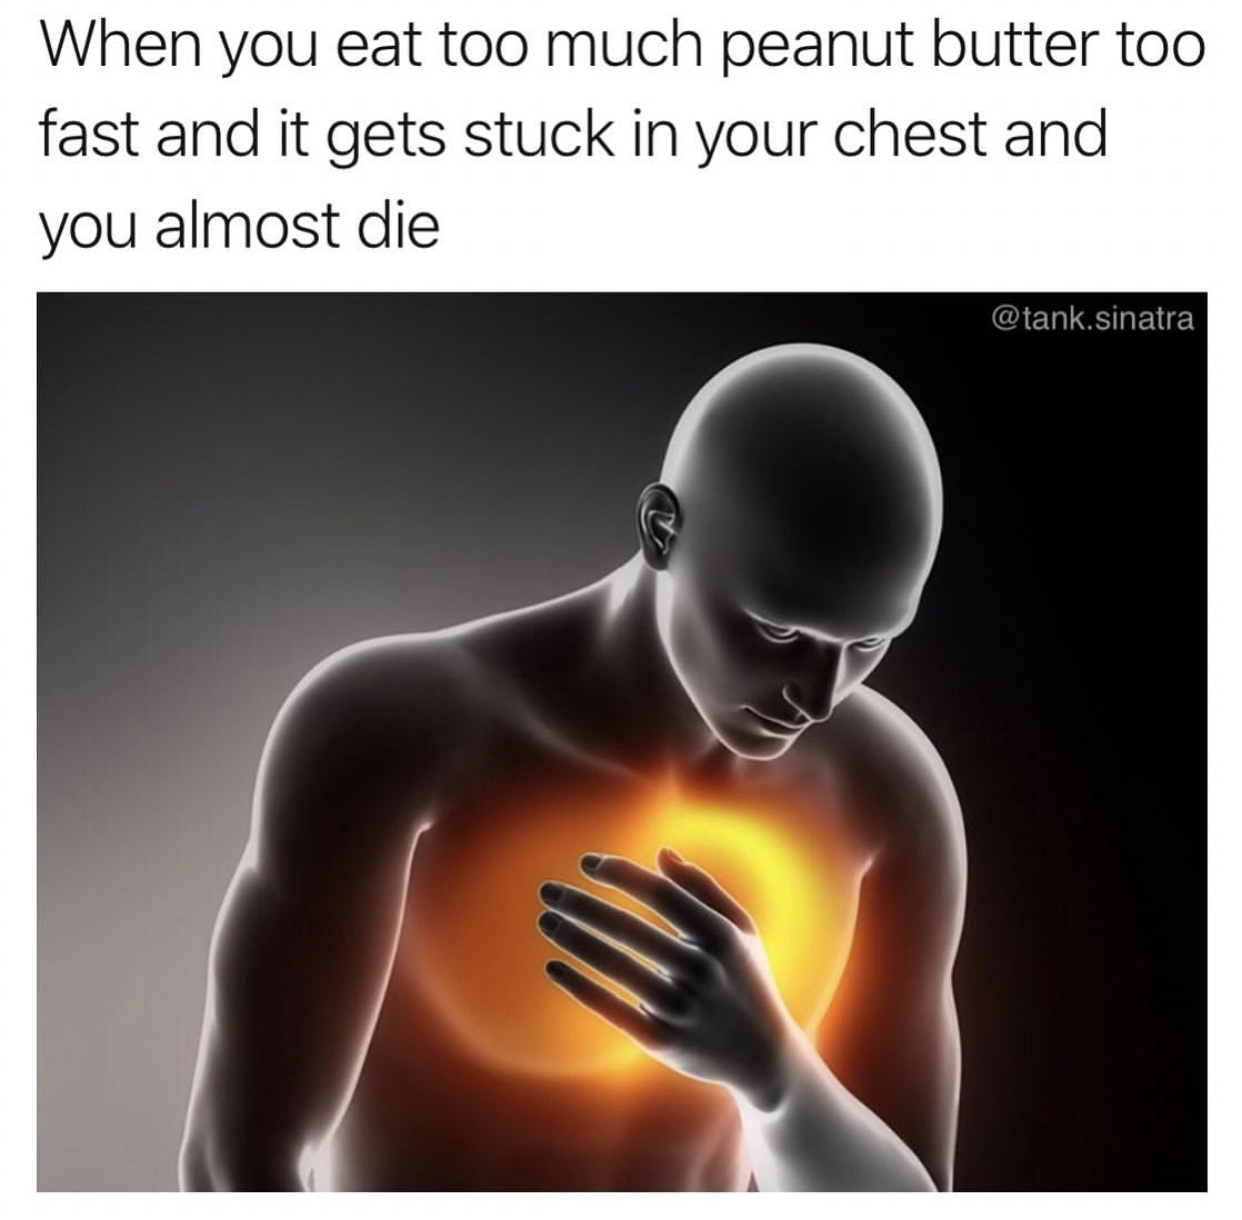 pain heart - When you eat too much peanut butter too fast and it gets stuck in your chest and you almost die .sinatra